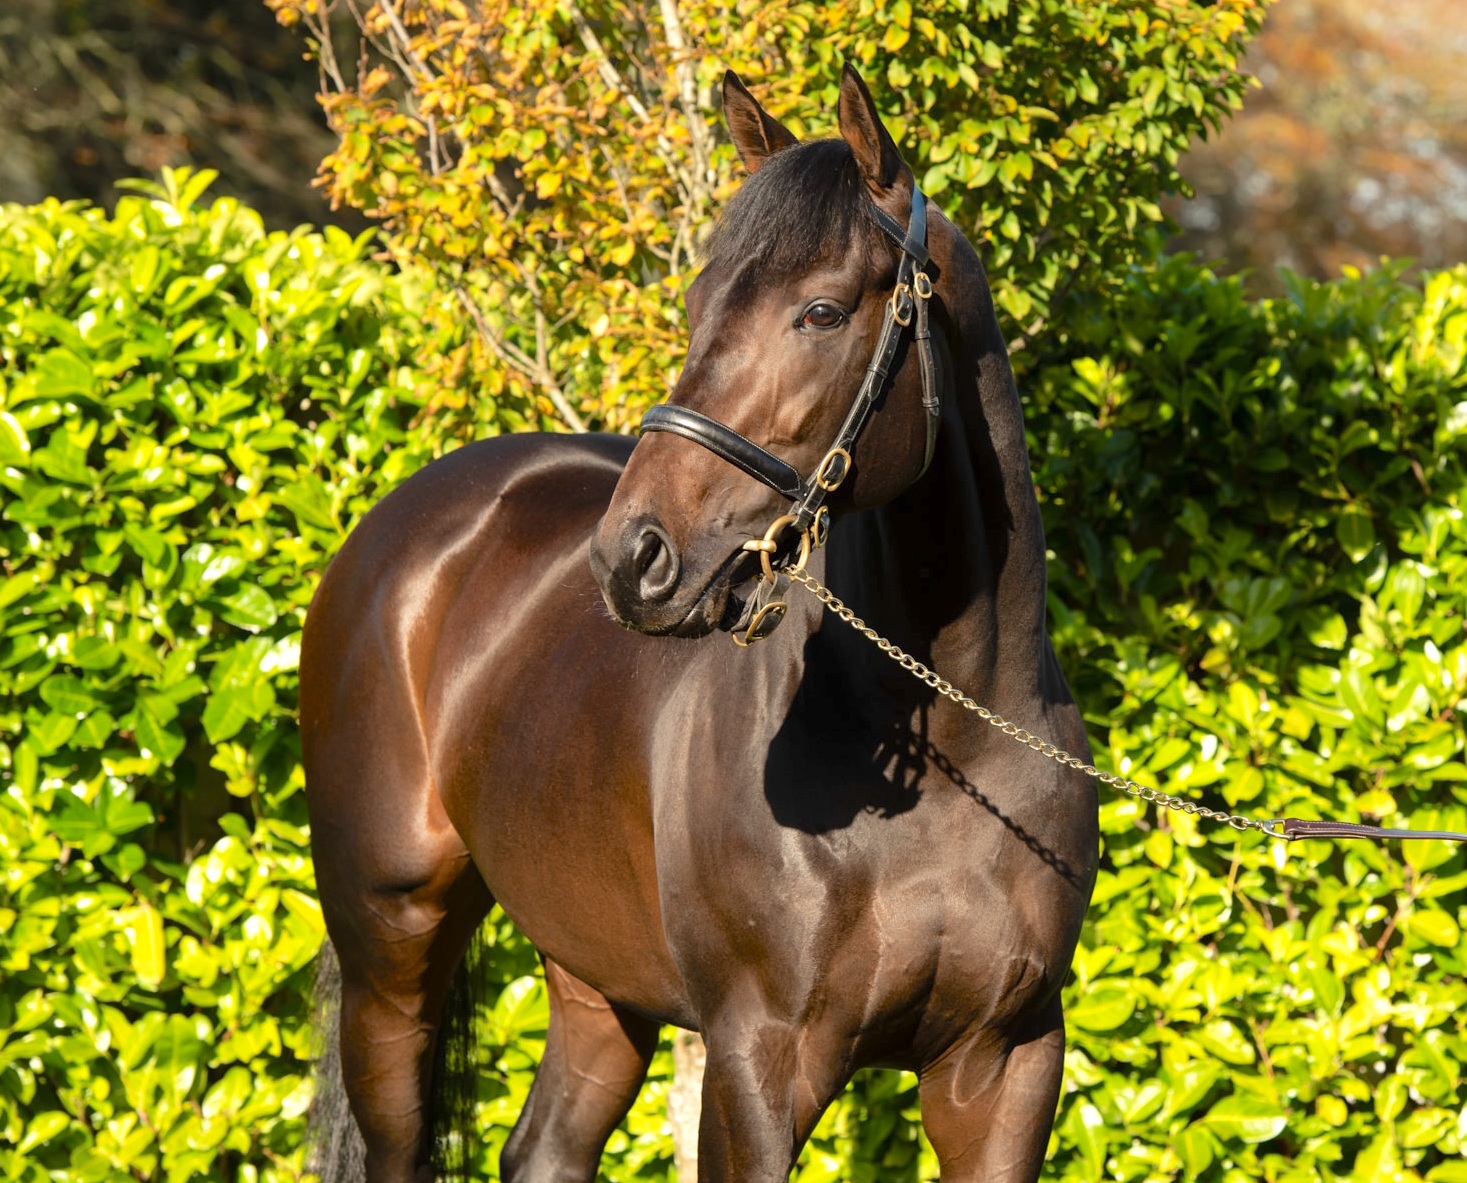 New sire Arizona: “When you see him, he will blow you away,” says Mark Byrne. Photo: Coolmore